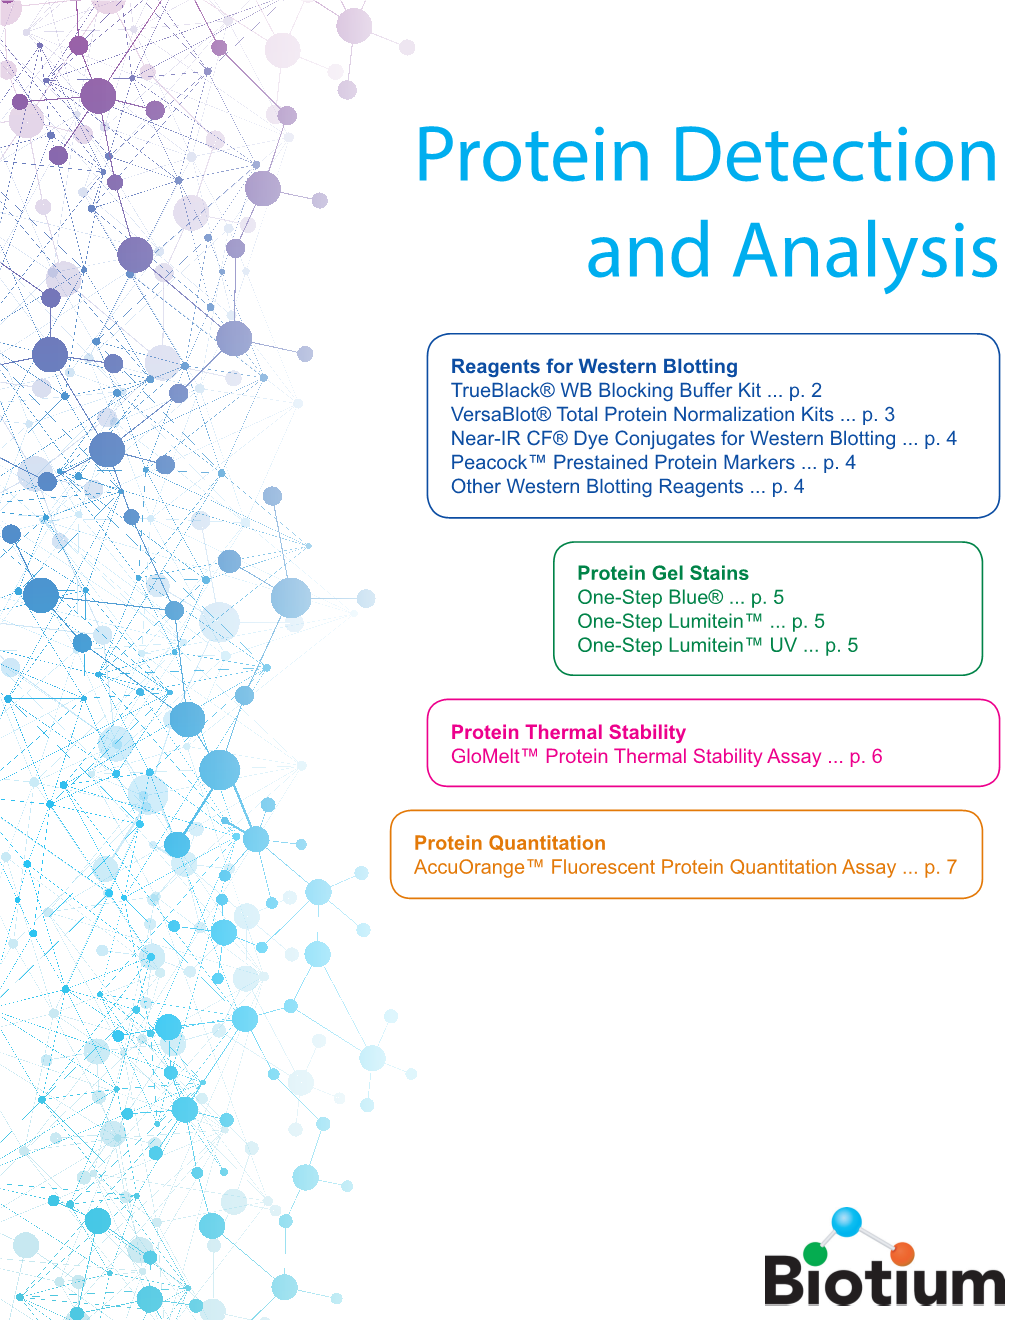 Protein Detection and Analysis Brochure